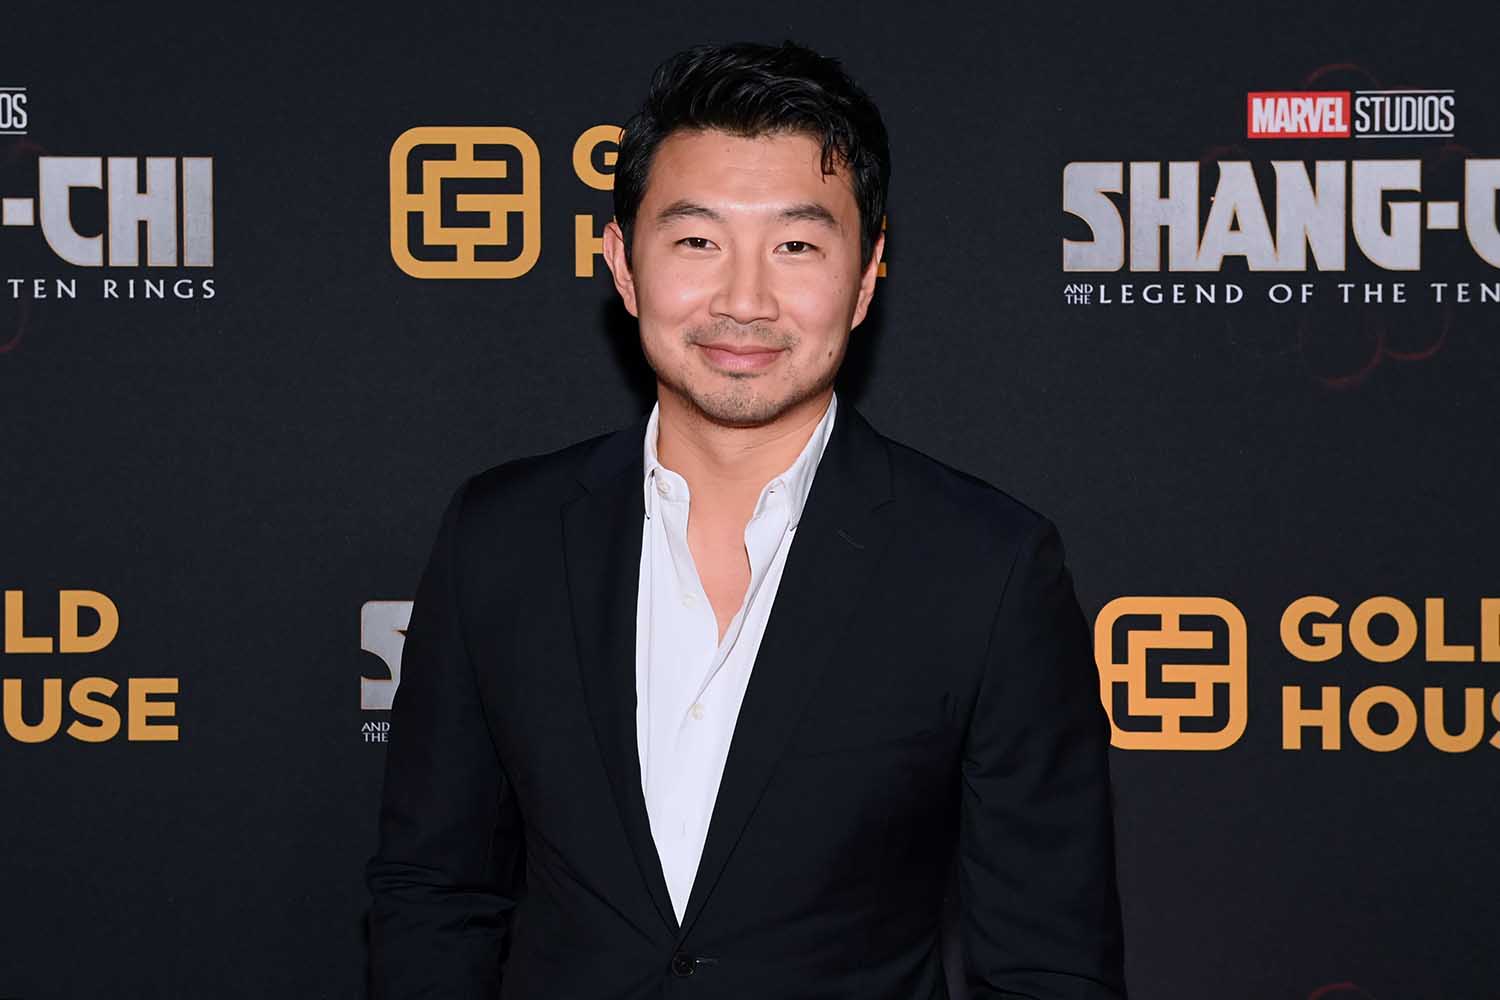 Simu Liu attends the Toronto Premiere of 'Shang-Chi and the Legend of the Ten Rings' at Shangri-La Hotel on September 01, 2021 in Toronto, Ontario.